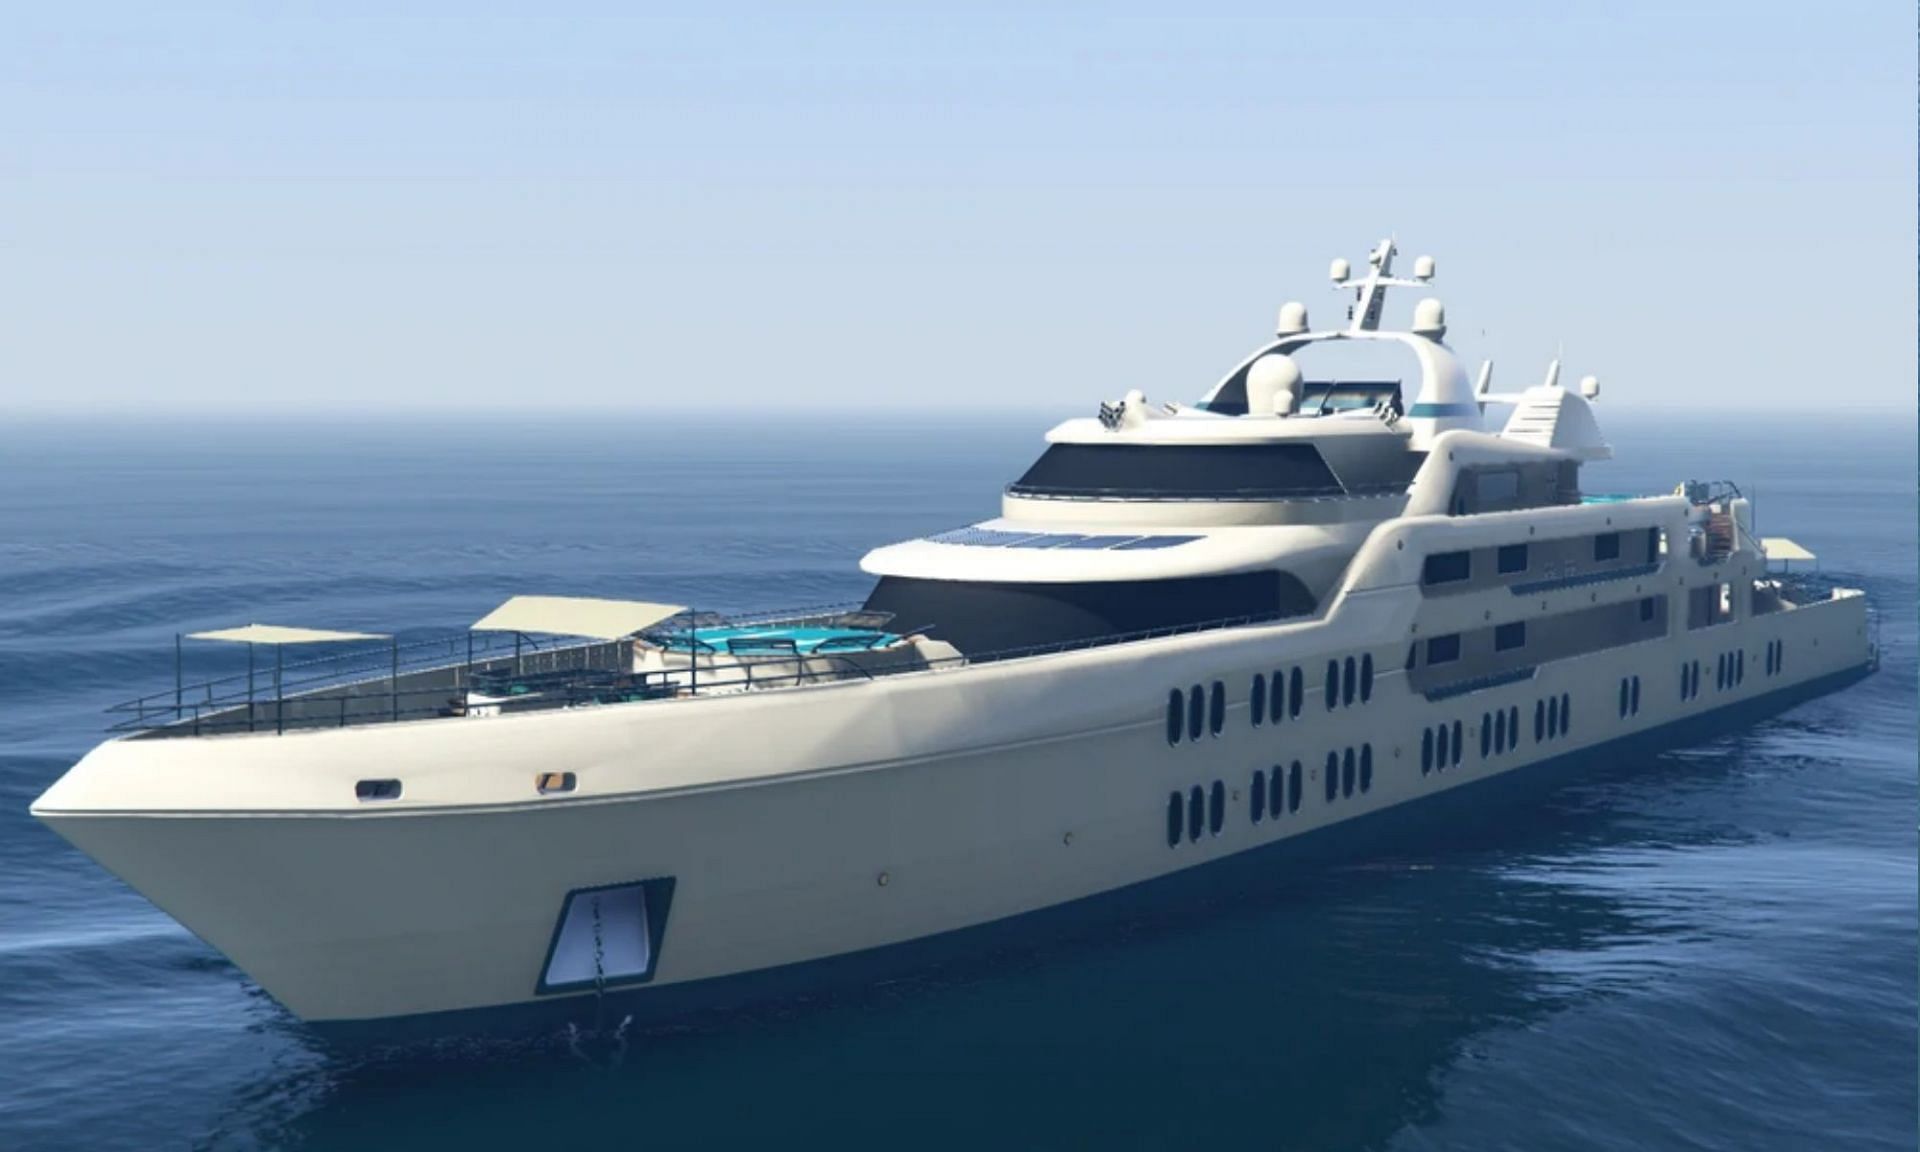 Sail out to the high seas with a luxury yacht (Image via Rockstar Games)